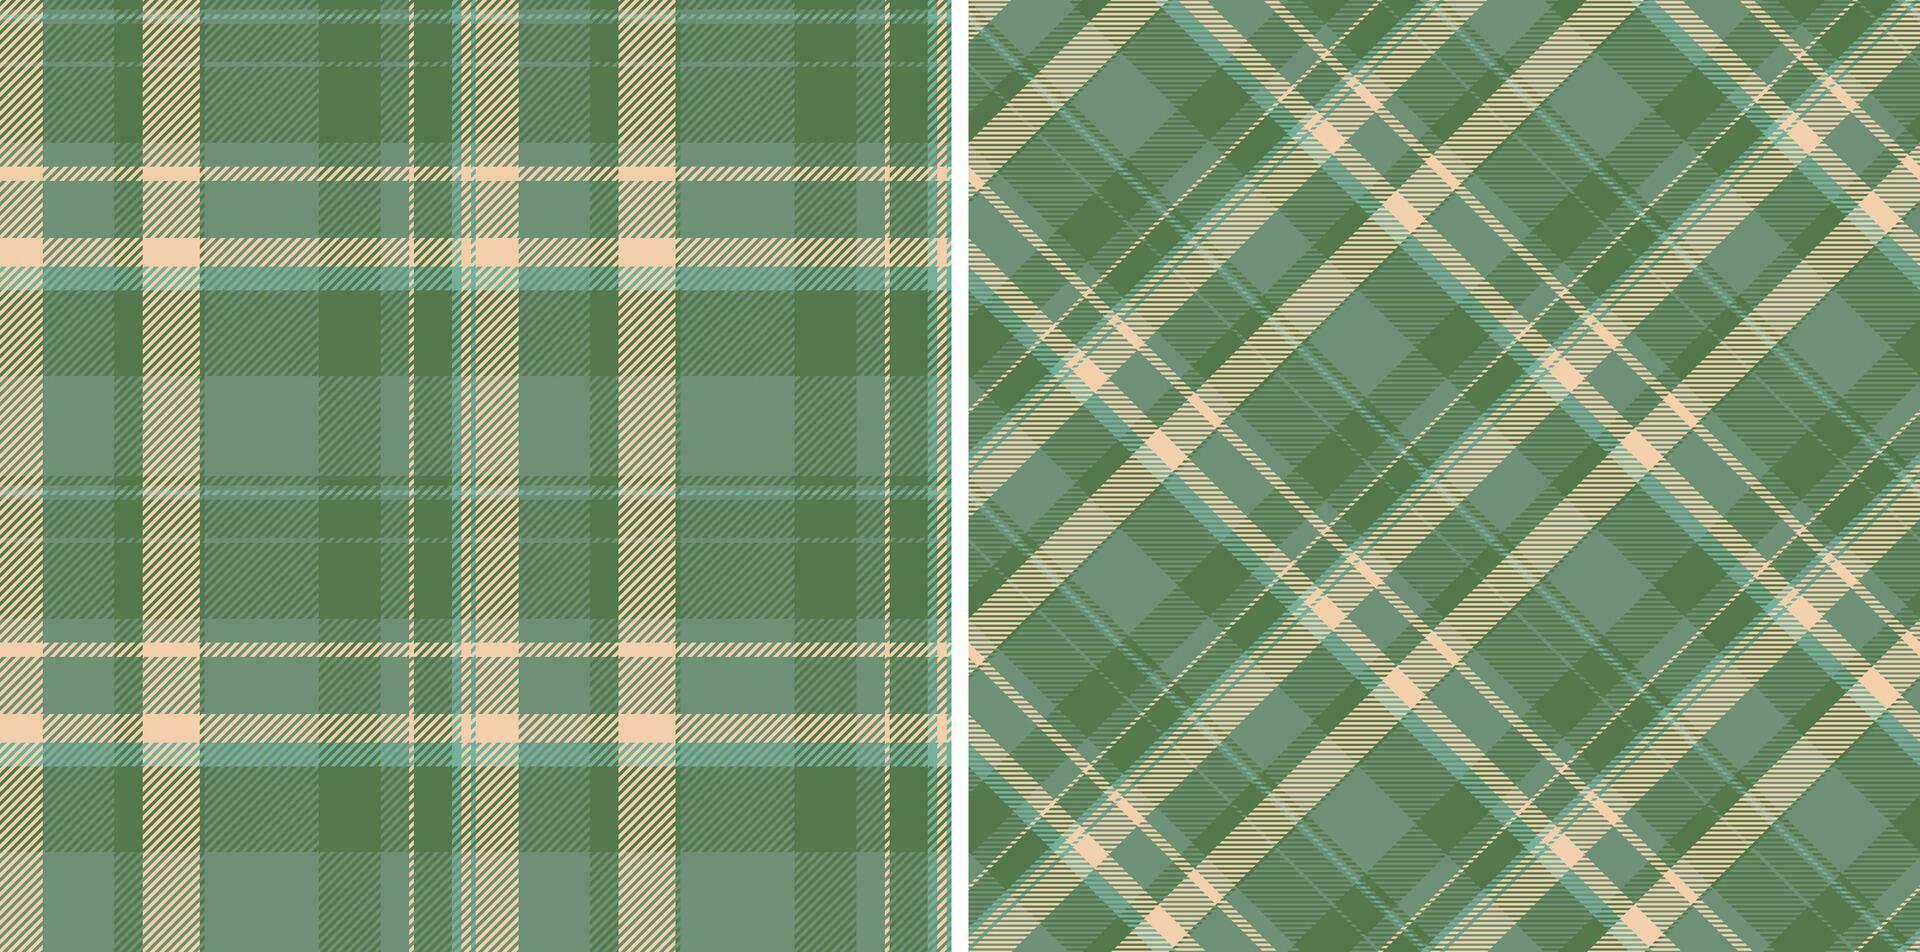 Background tartan textile of fabric texture vector with a pattern seamless plaid check.